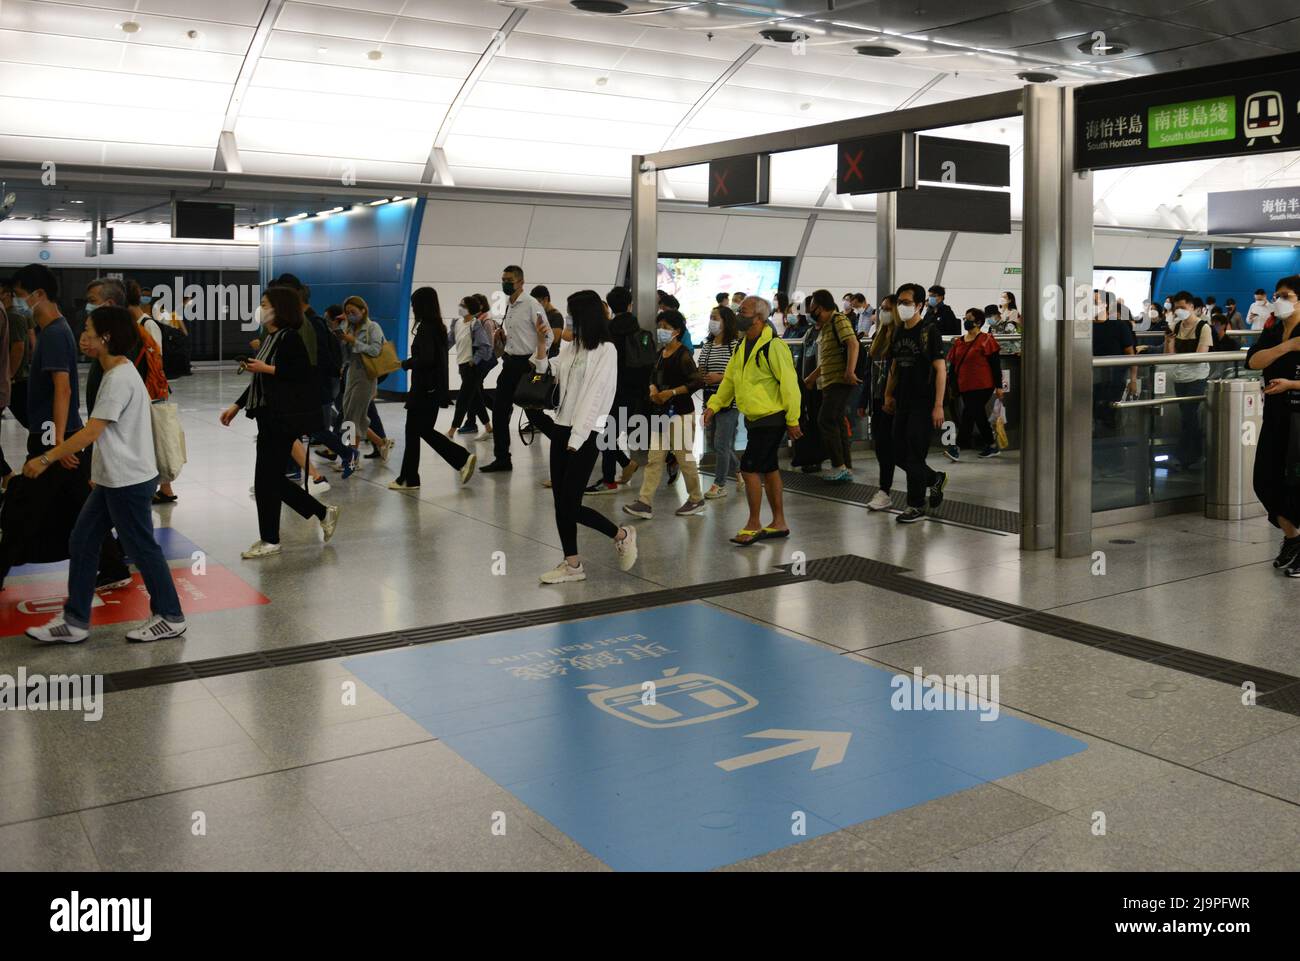 The new East rail line station in the Admiralty MTR station in Hong Kong. Stock Photo